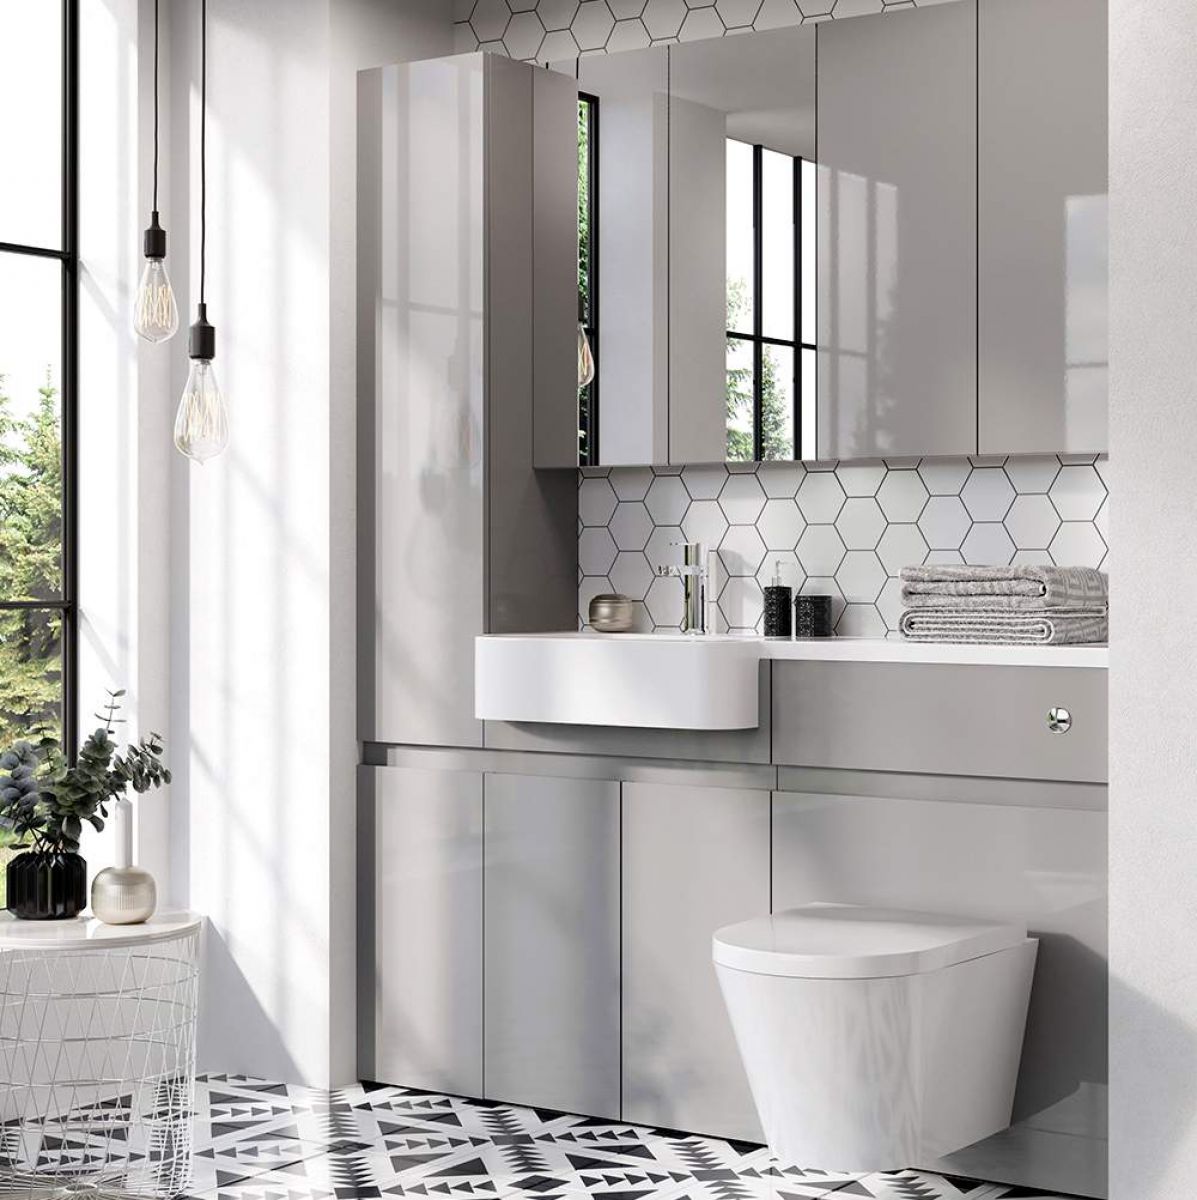 image example of fitted bathroom furniture